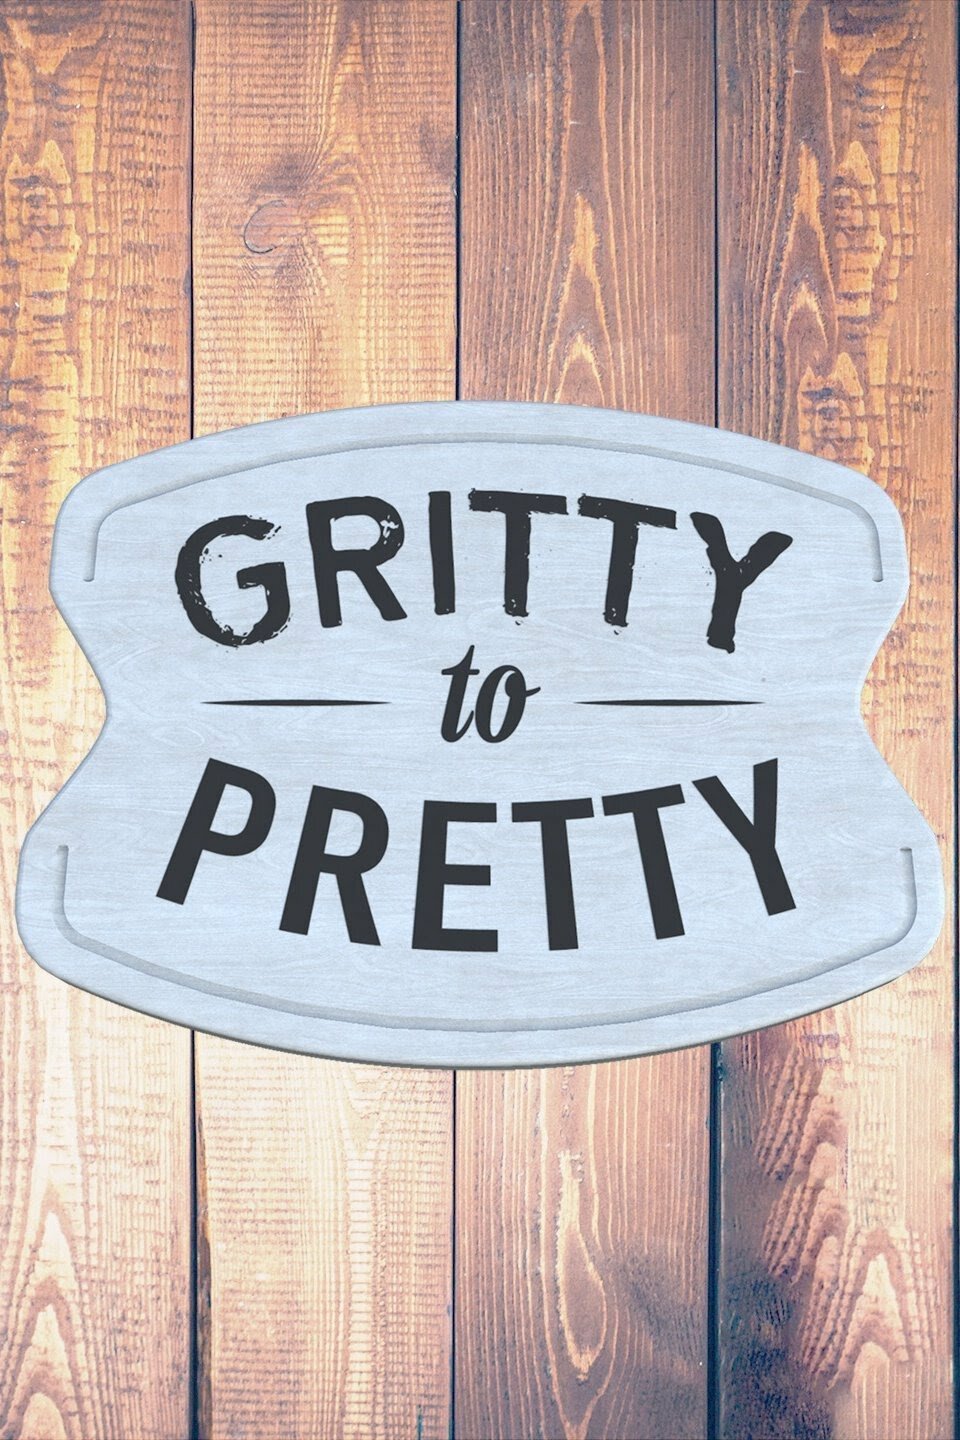 Gritty to Pretty